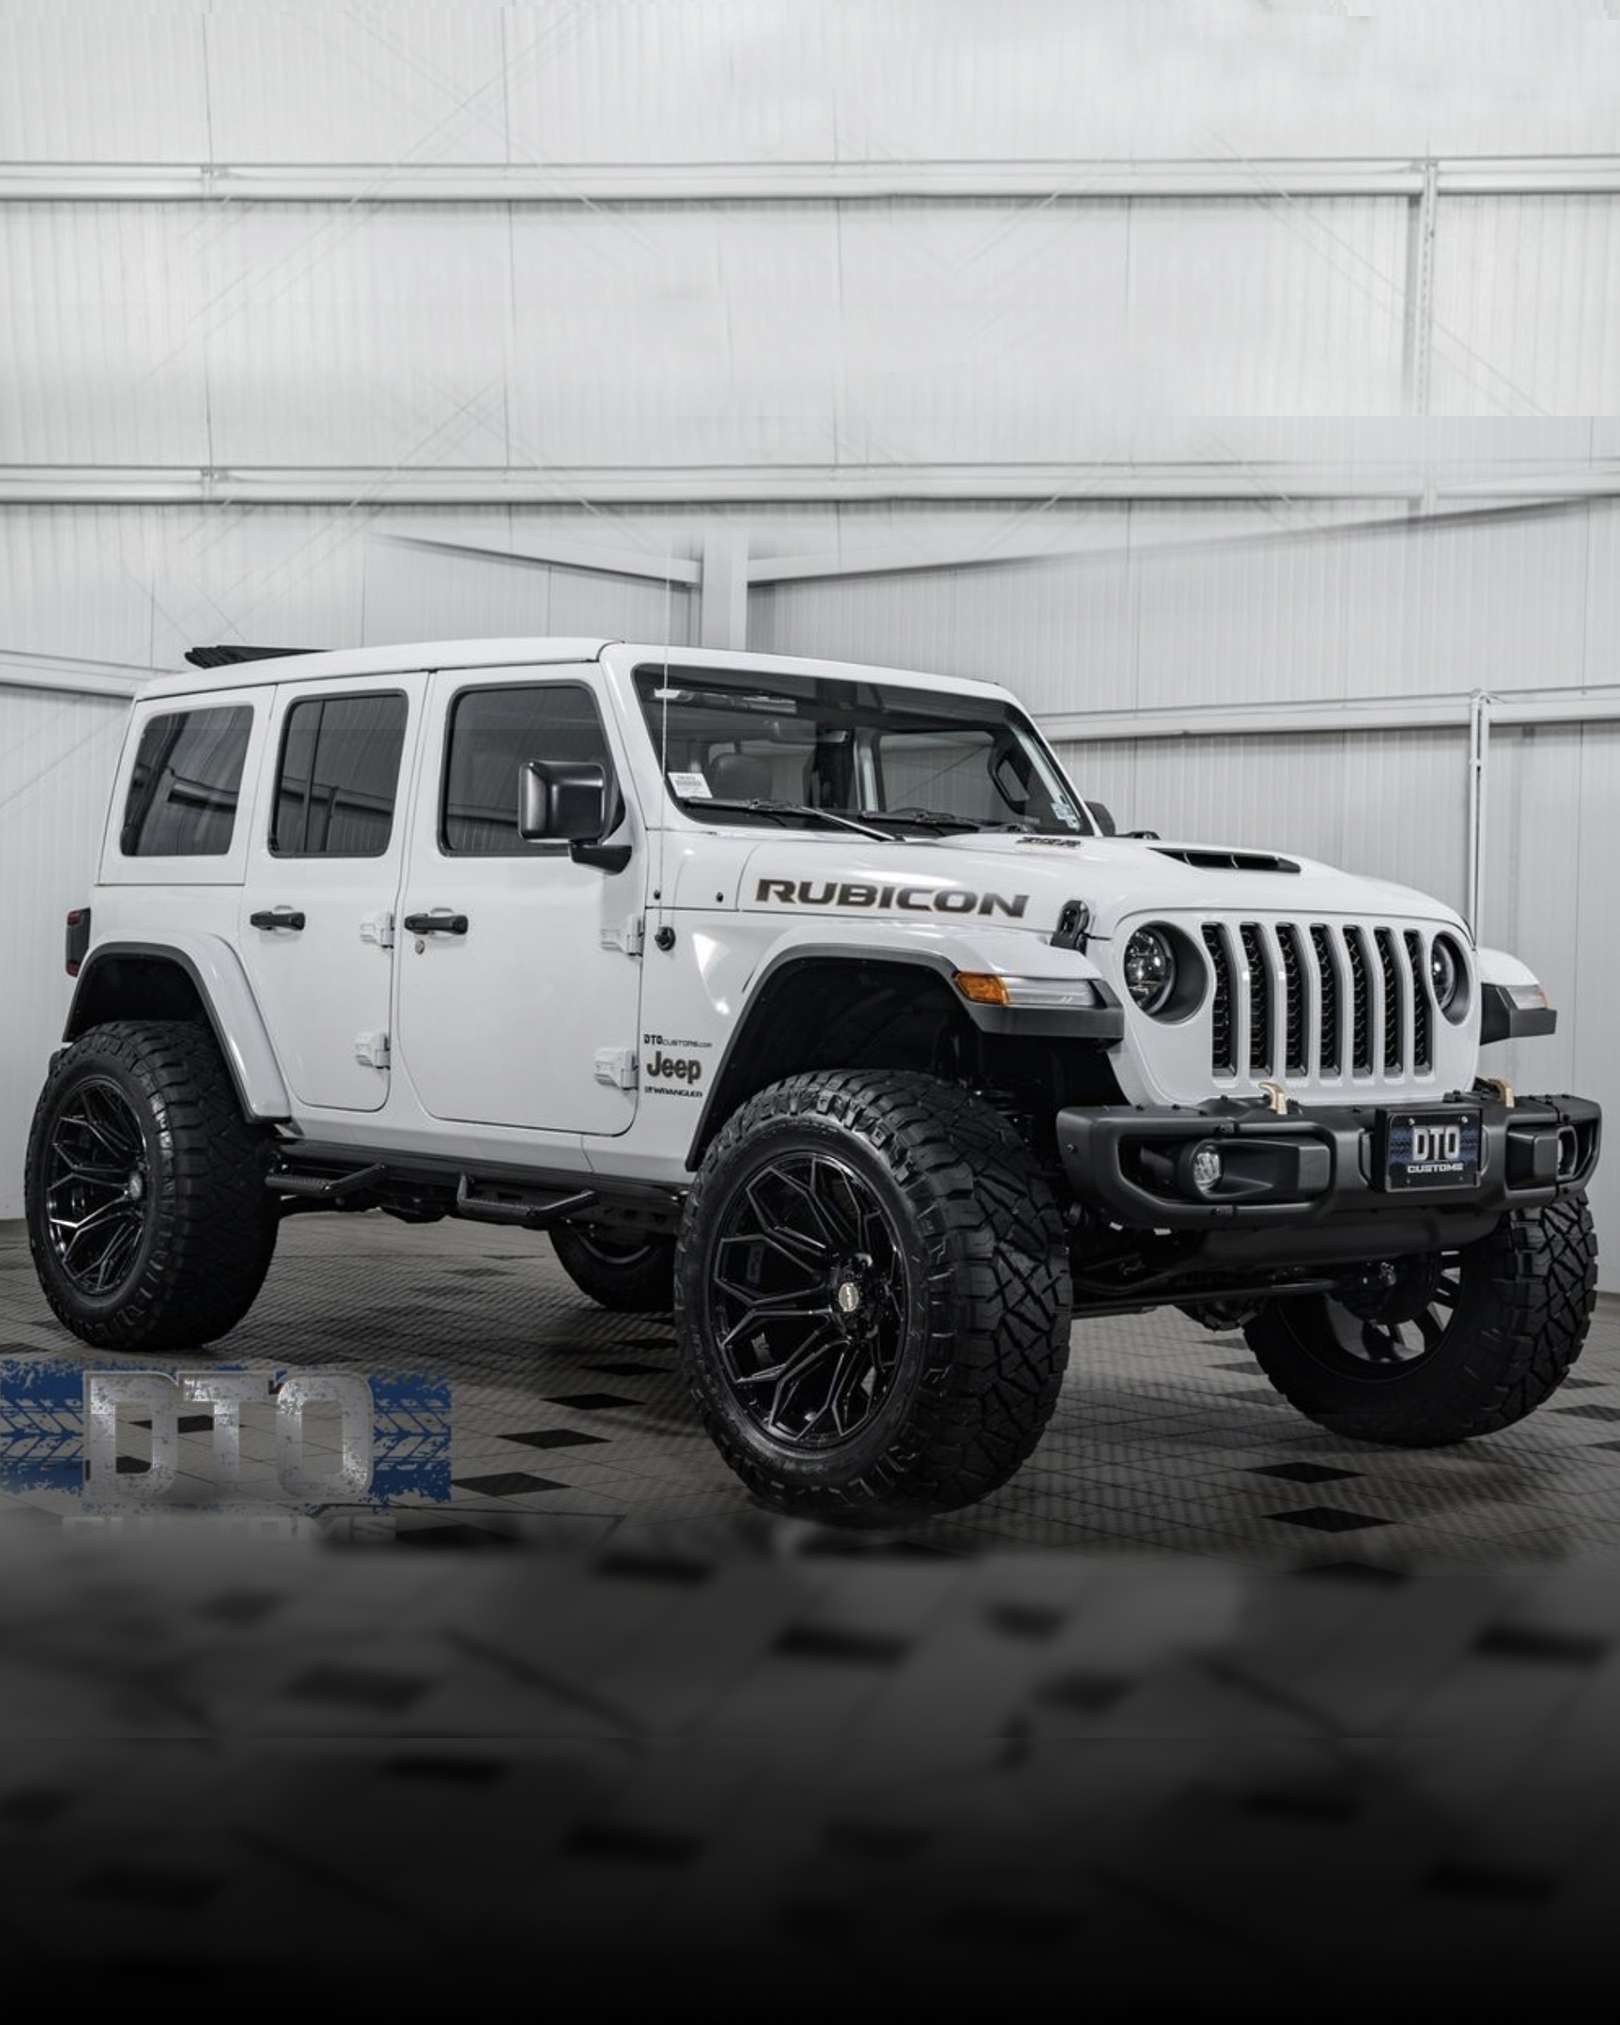 JEEP WRANGLER RUBICON BY DTO CUSTOMS ON 4PLAY WHEELS – 4PLAY Wheels